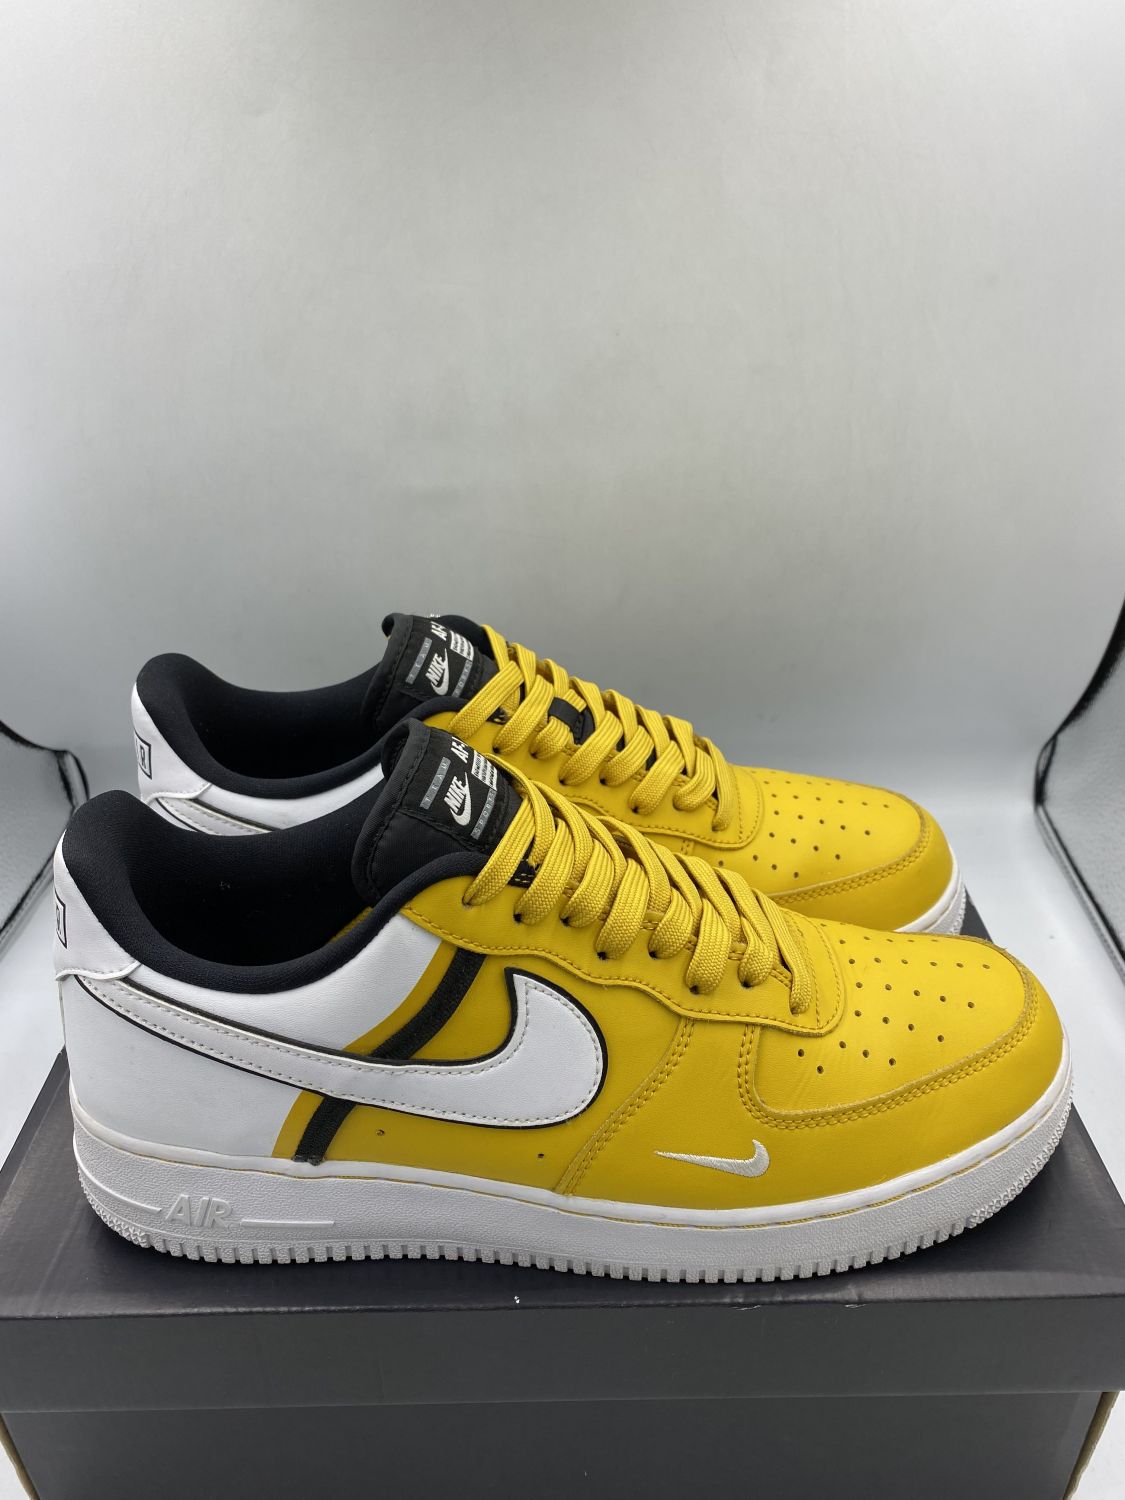 Nike Air Force 1 07 LV8 2 Mens Trainers CI0061 Sneakers Shoes (UK